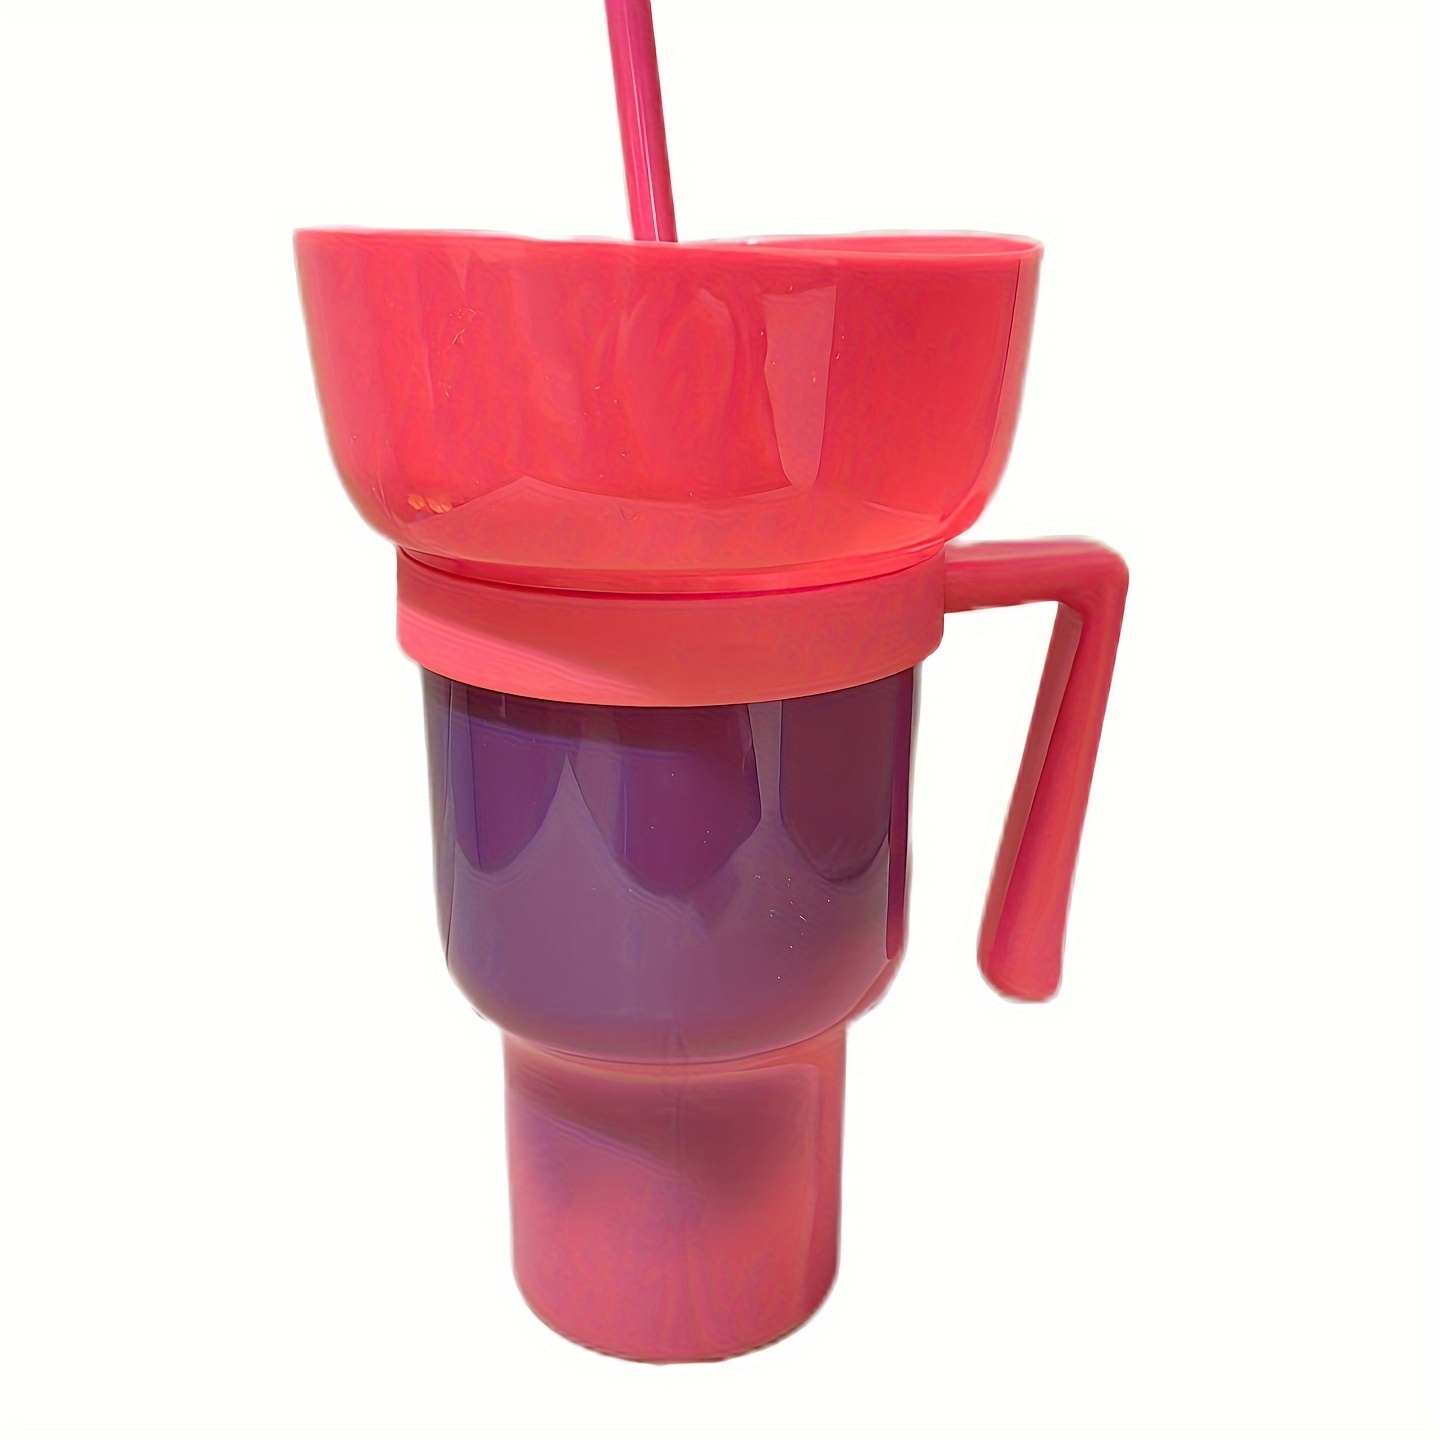 Tumbler Portable Stadium 2 In 1 Snack Bowl Drink Cup with Straw  Multipurpose Color Change Snacks Container For Home Cinemas Use